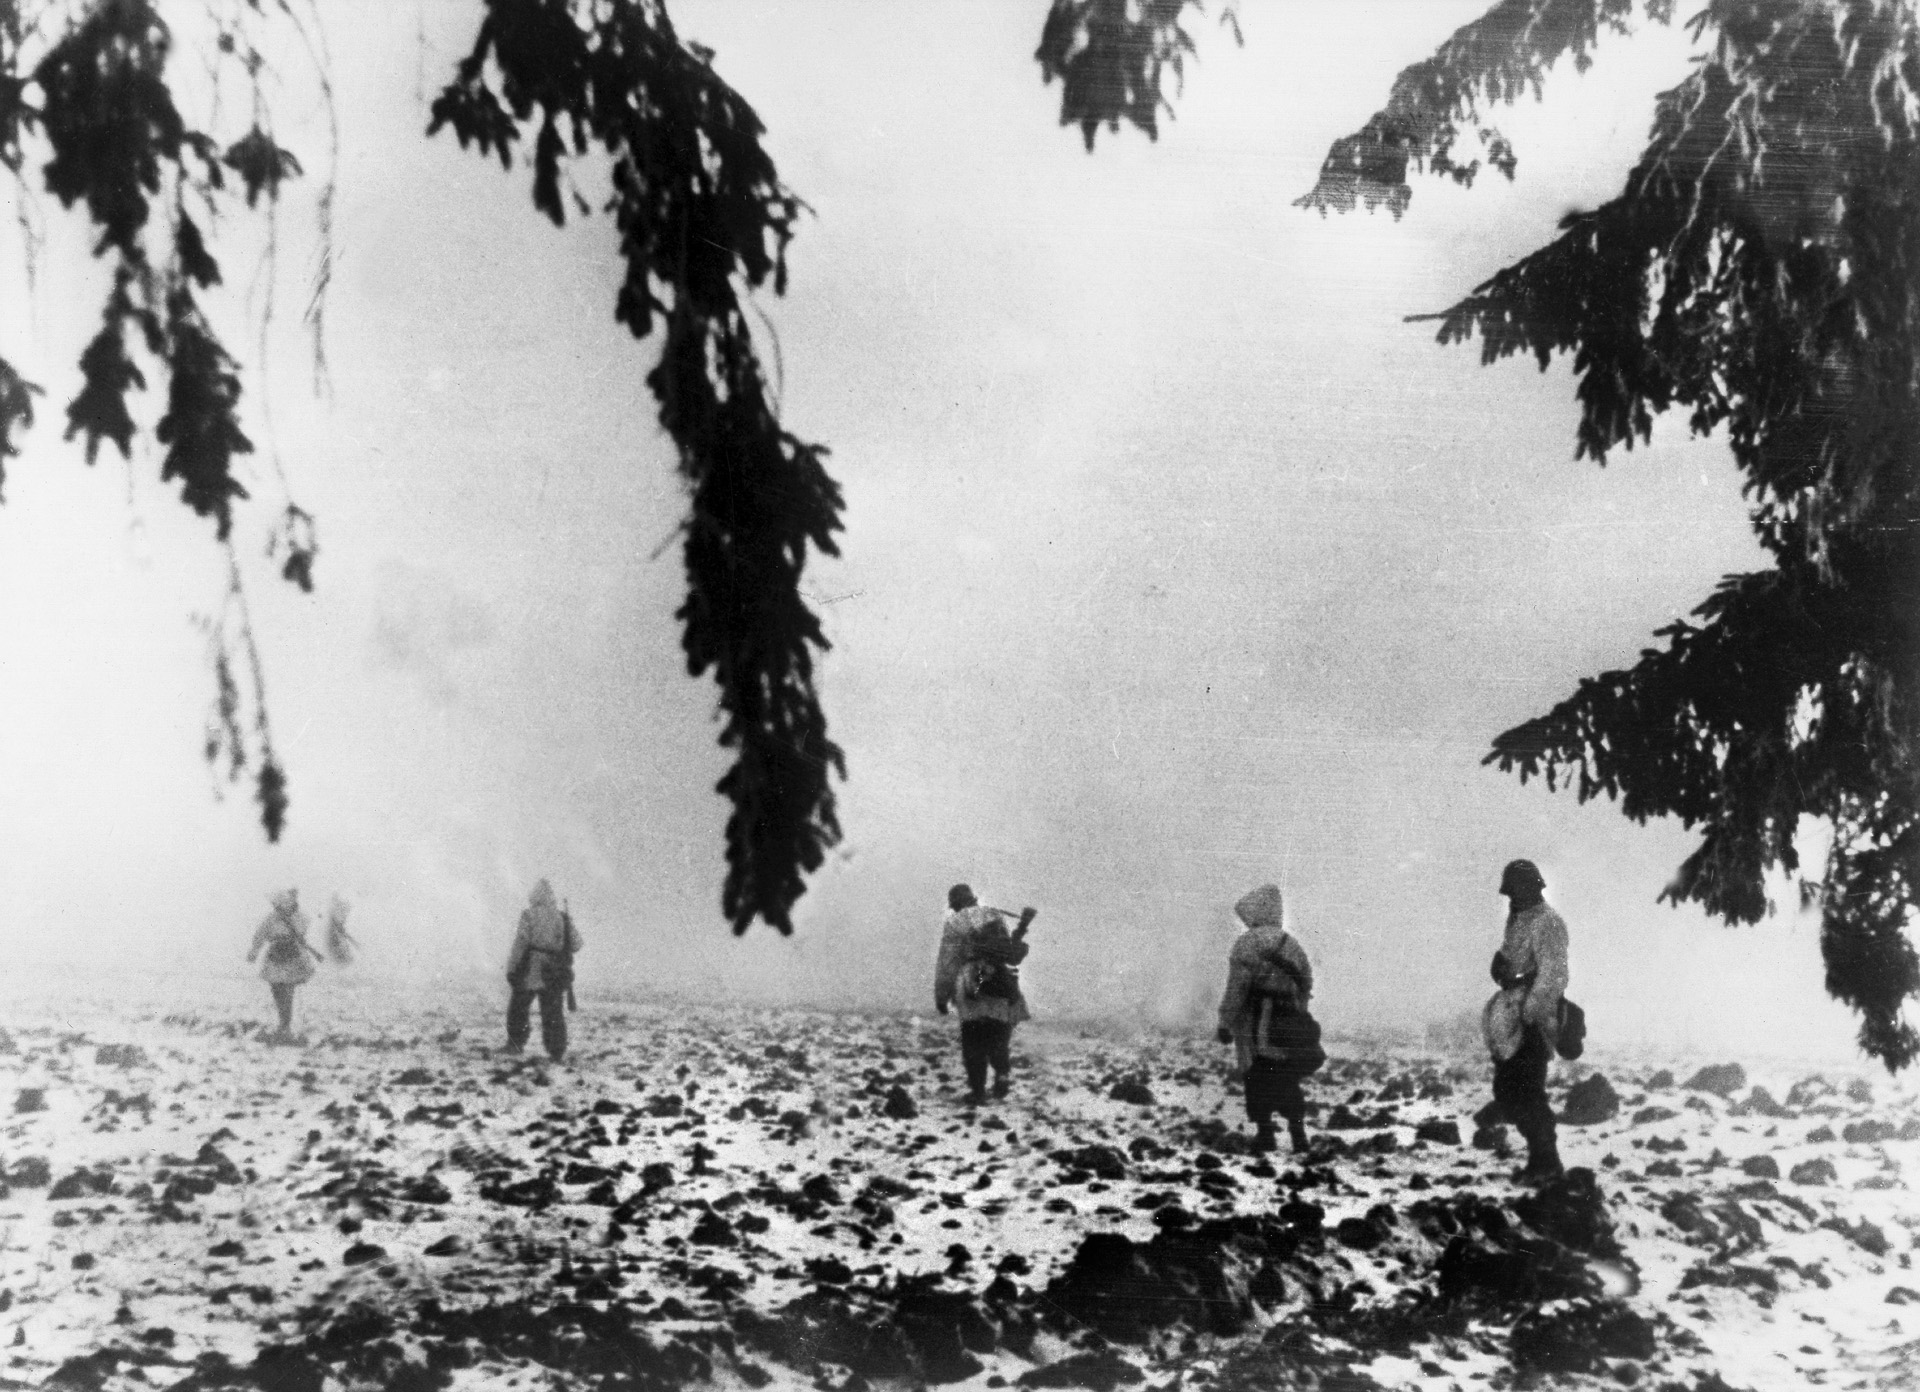    German volksgrenadiers in winter camouflage spread out as they advance through the fog during Operation Nordwind. The goal of the German offensive was to break through the U.S. Seventh Army’s line and destroy its forces. 